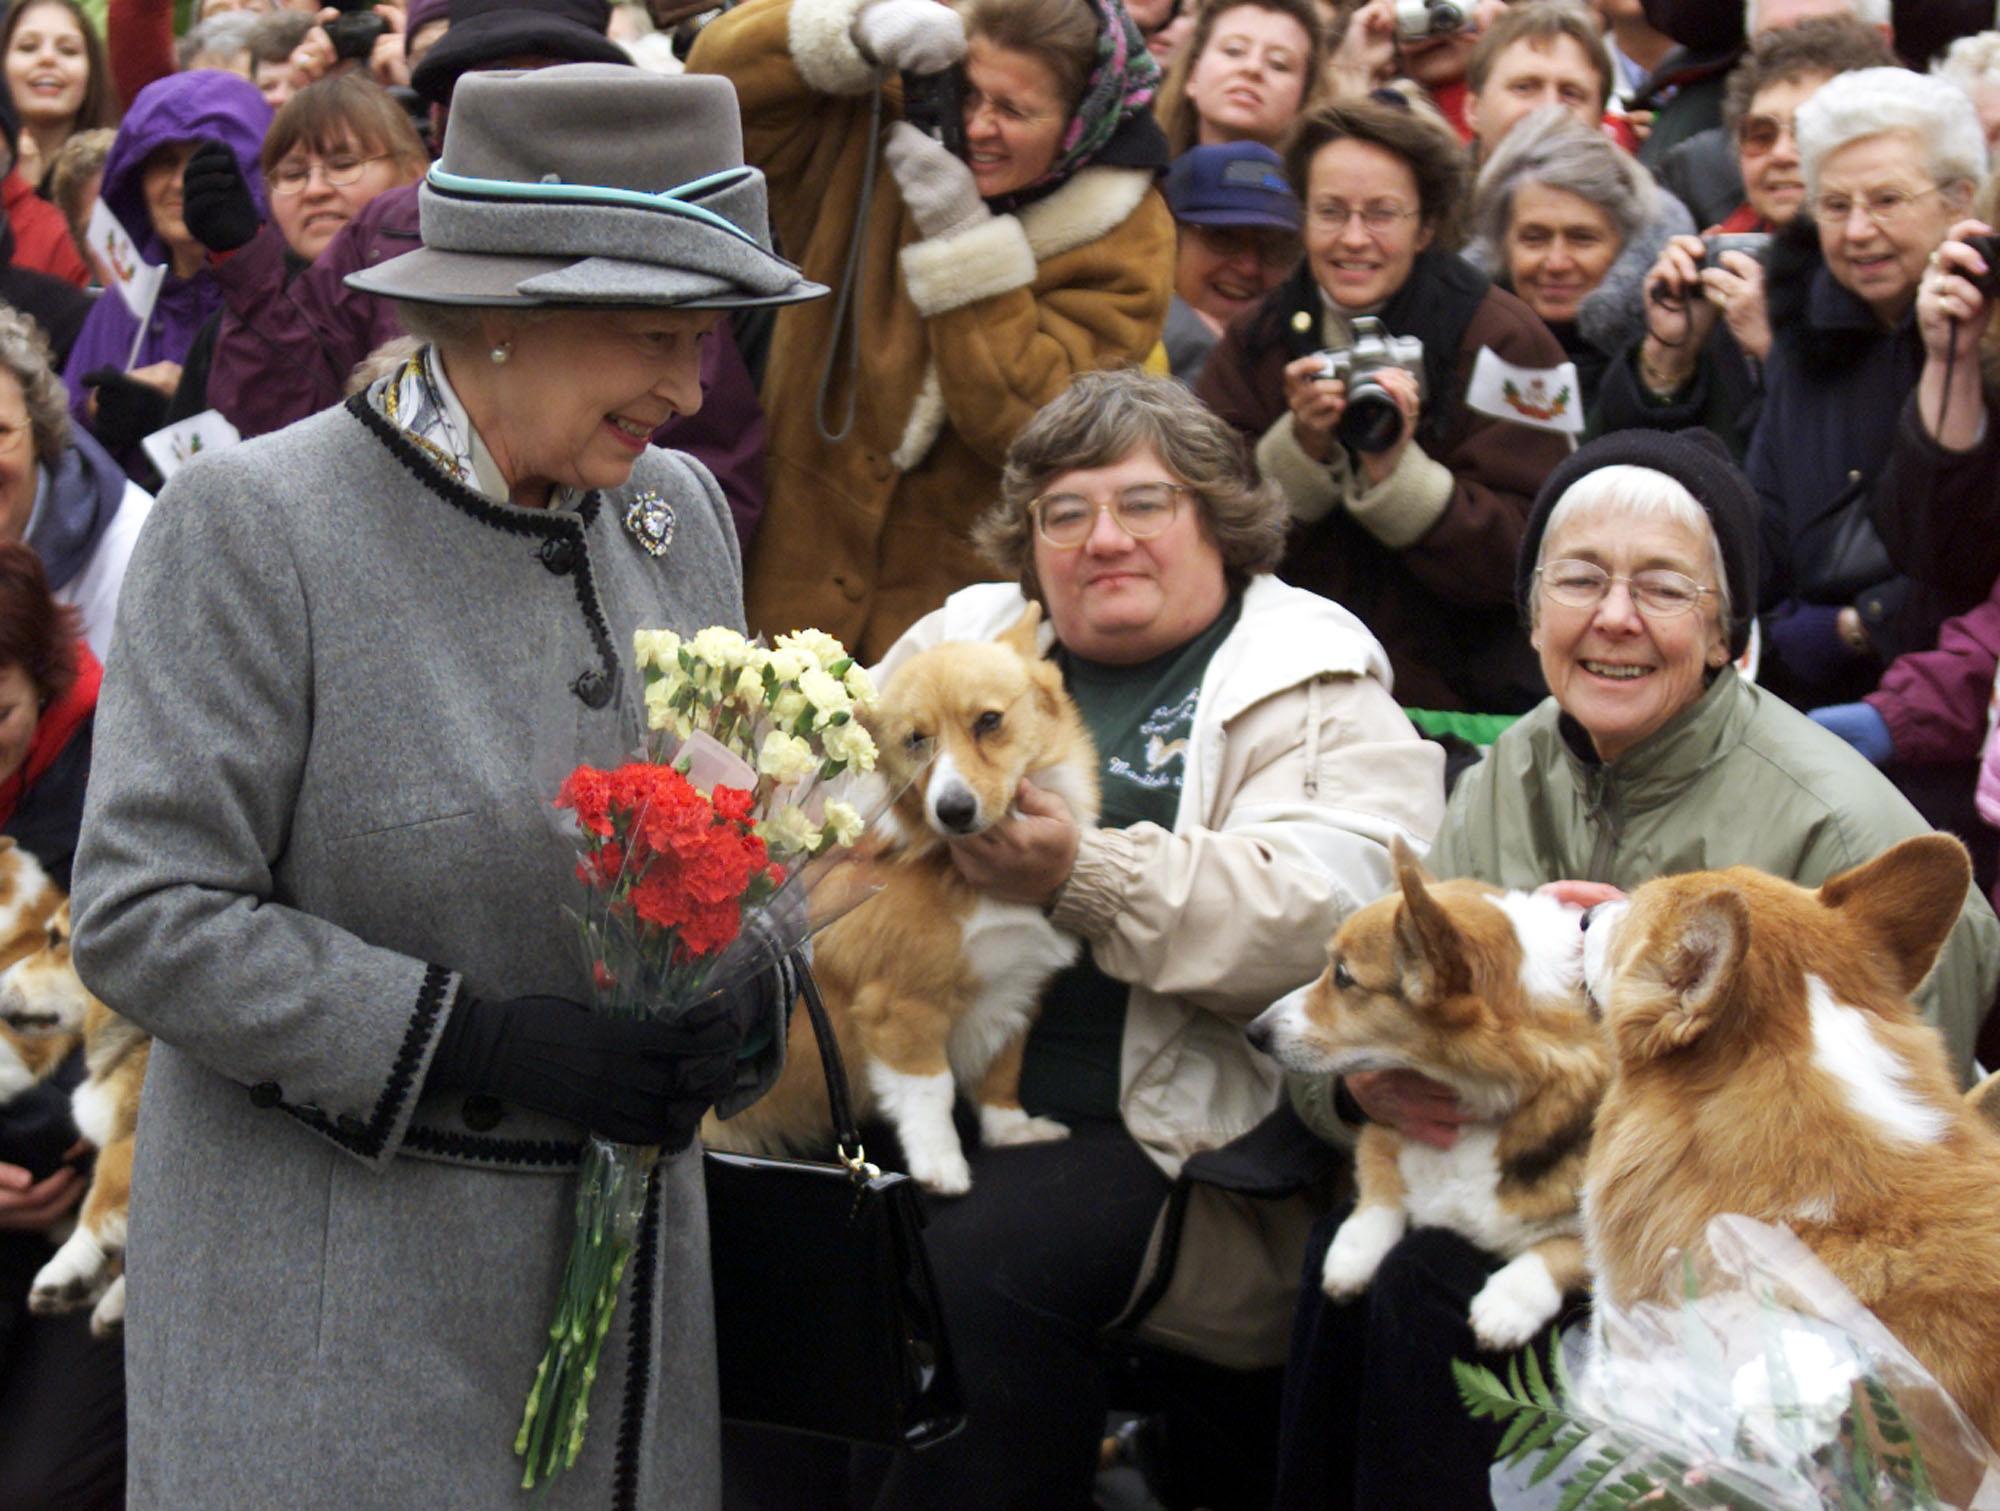 The Queen talks with members of the Manitoba Corgi Association during a visit to Canada in 2002